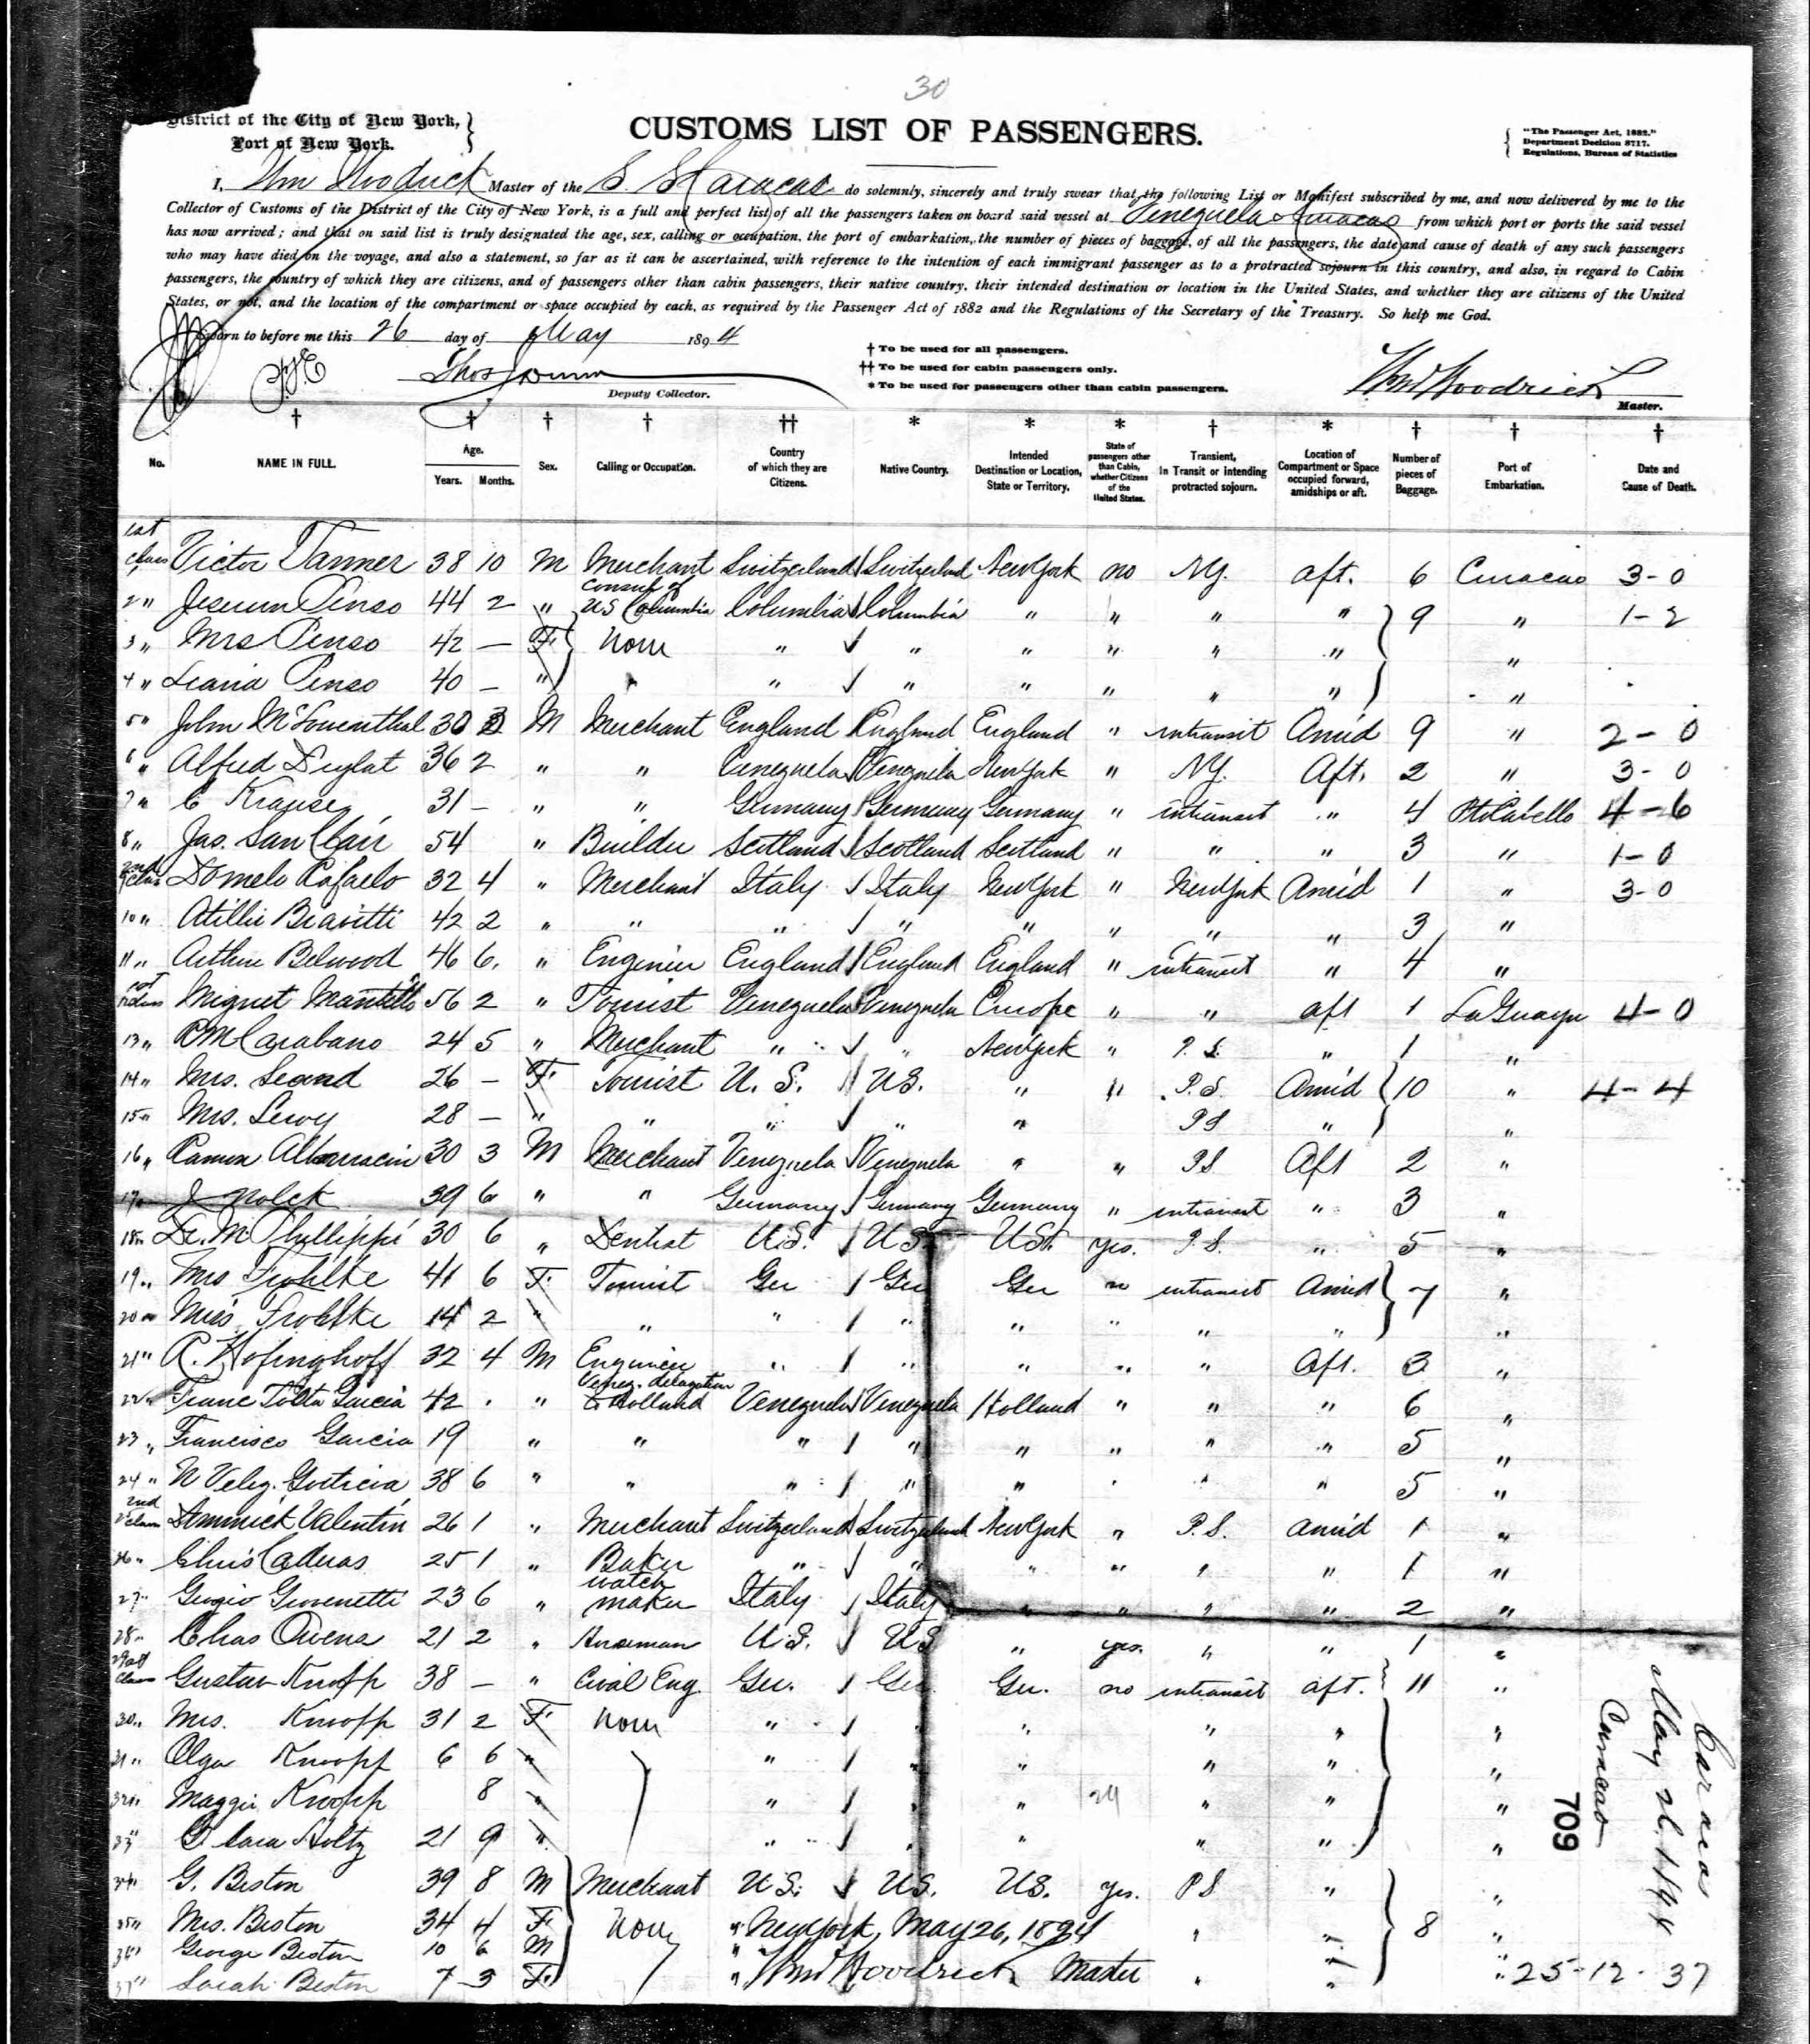 Customs List of Passengers arriving in New York on SS Caracas on 26th May 1894. JMcC is the fifth on the list.